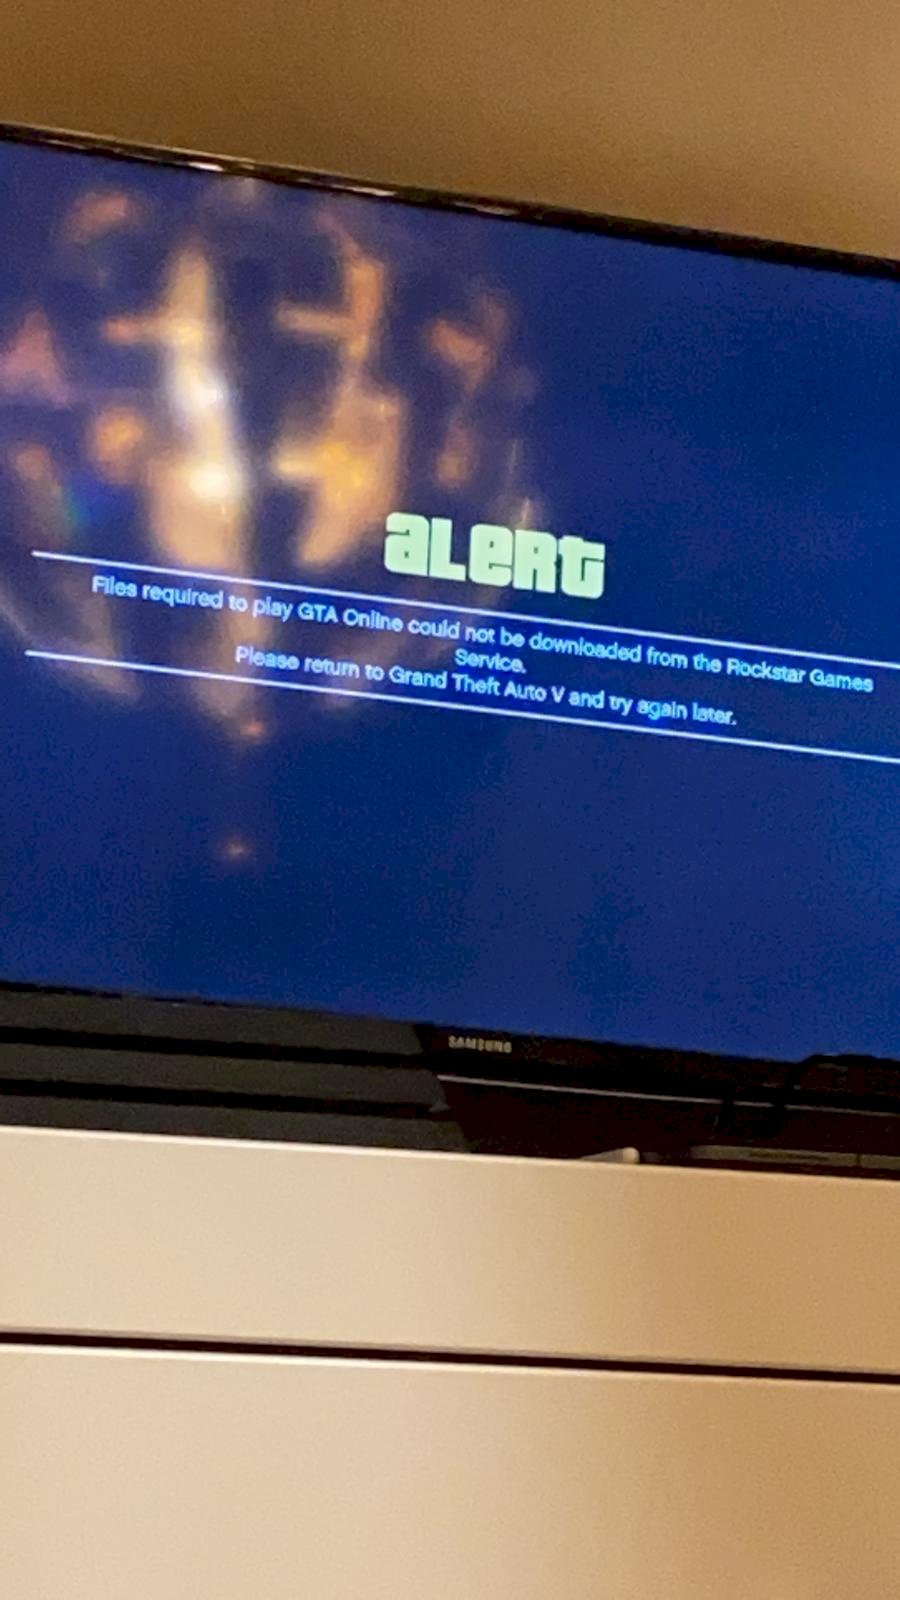 GTA error message what to do Ps4 - 1